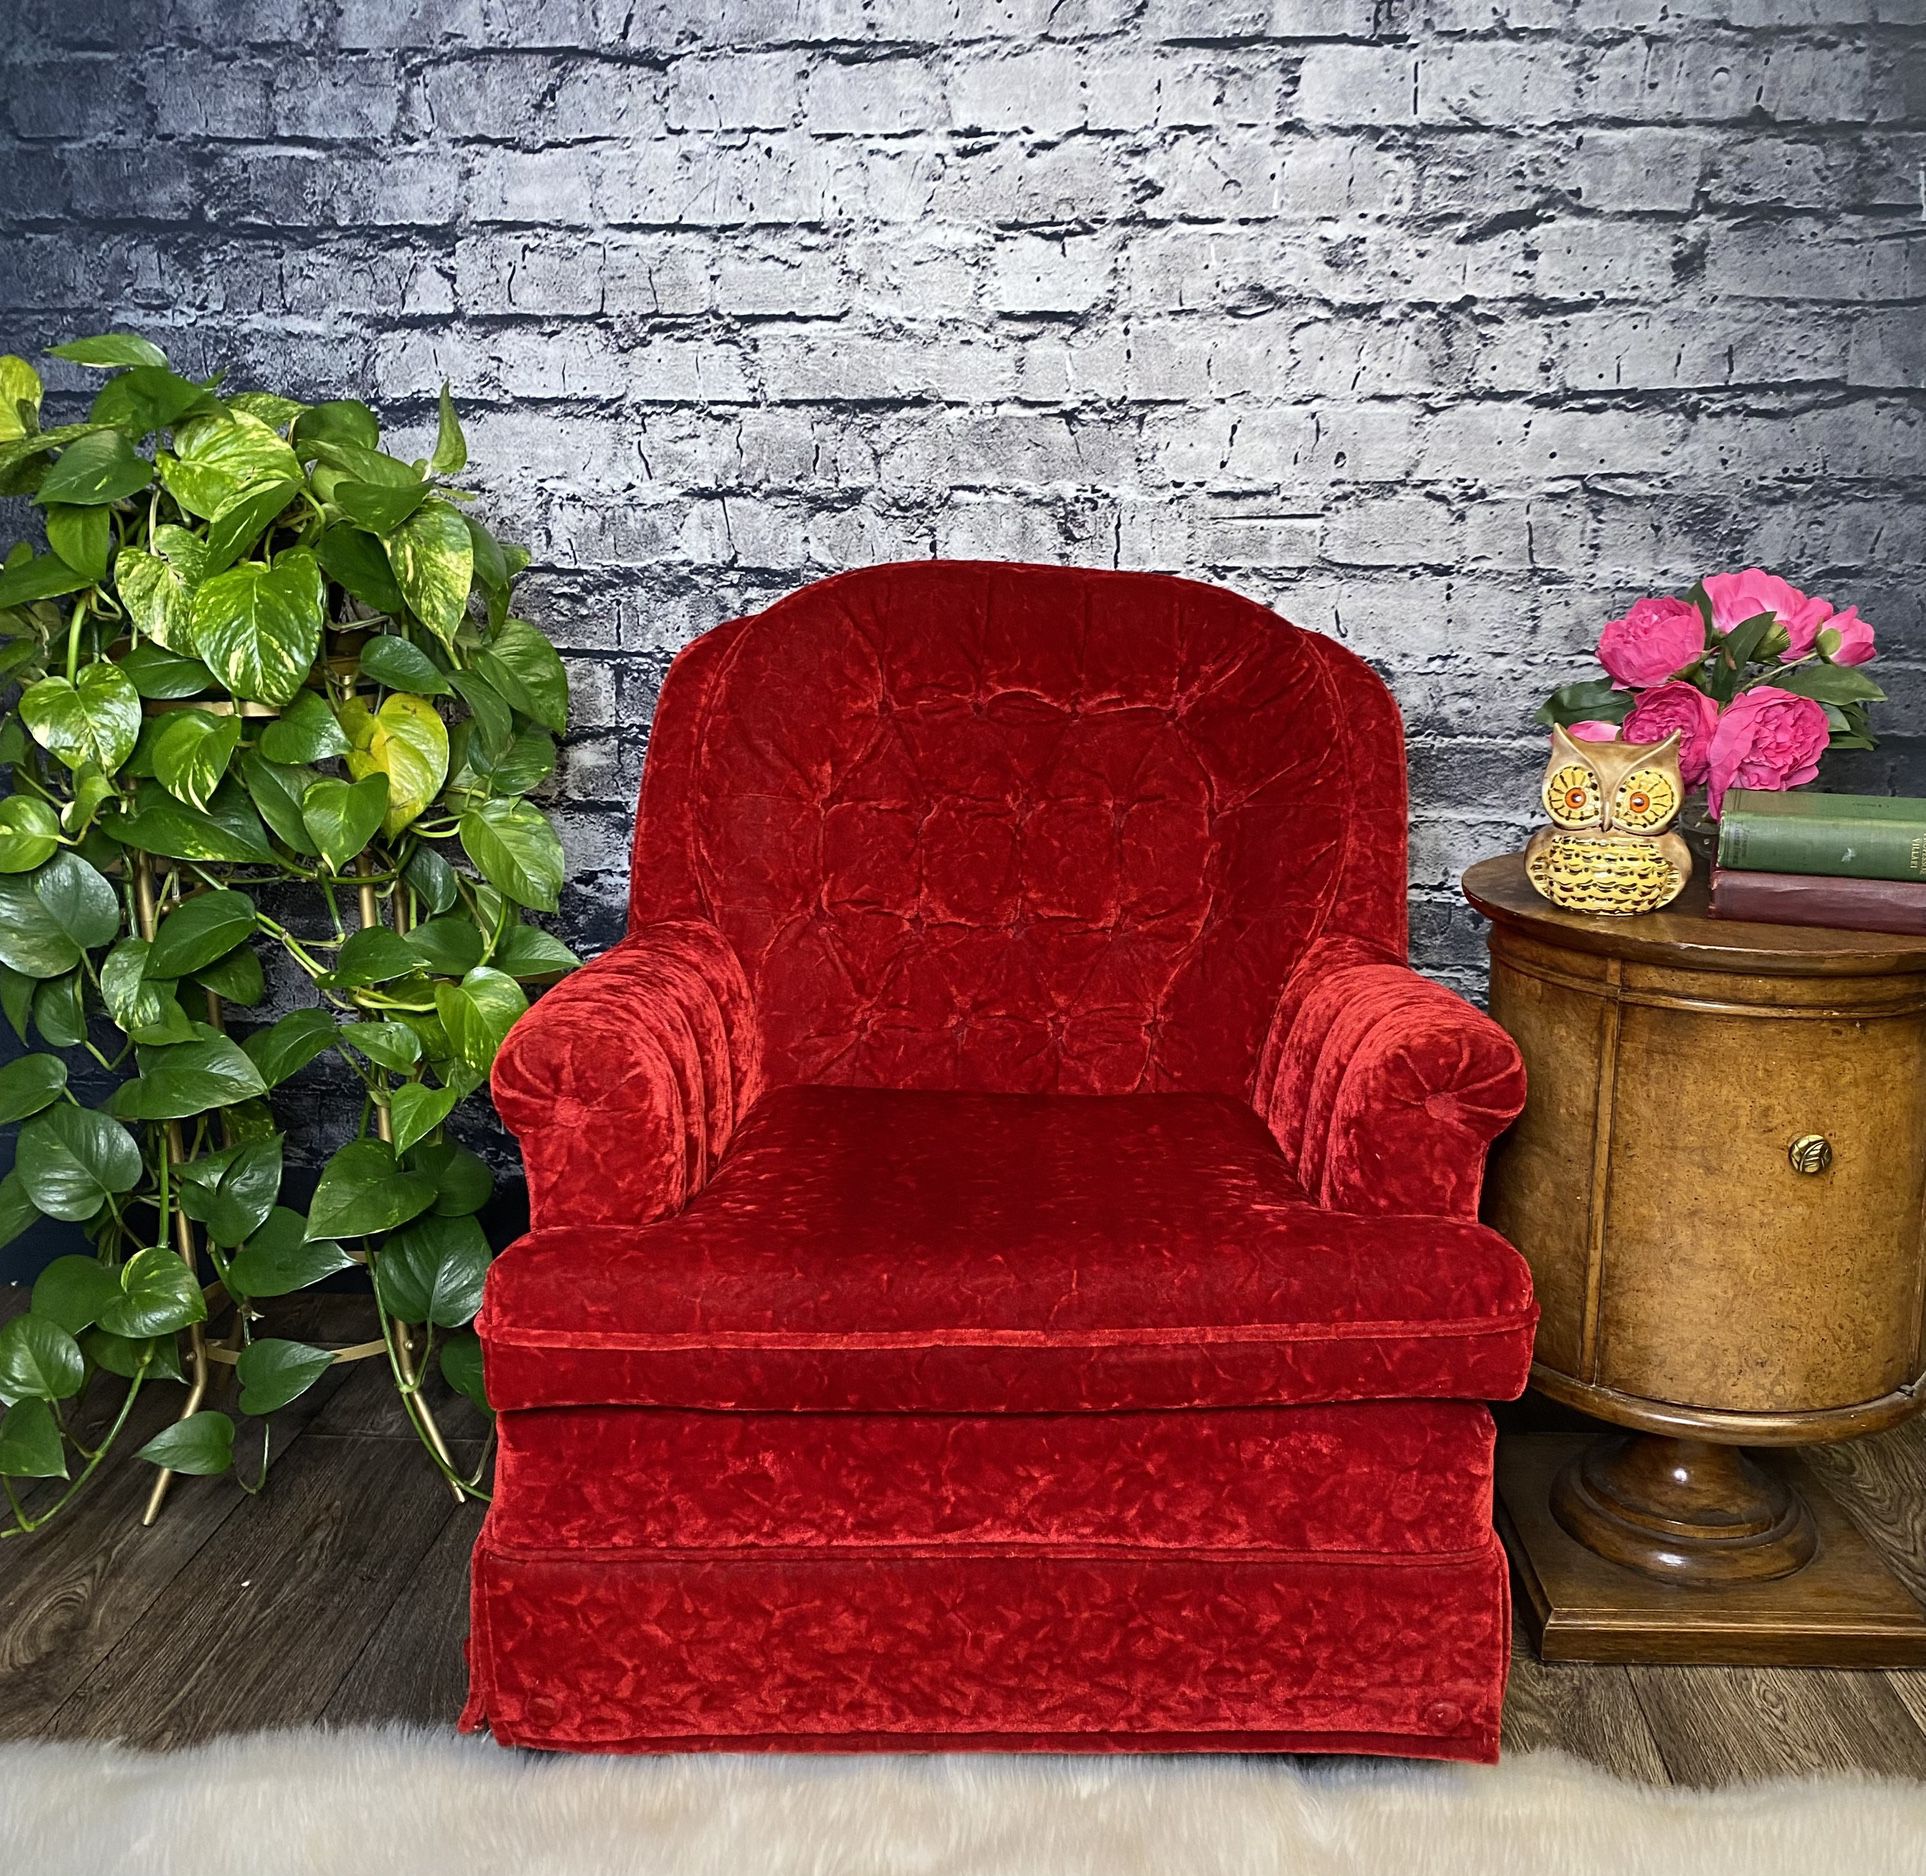 Luxurious Vintage Crushed Red Velvet Cherry Tufted Swivel Rocking Chair Armchair Mid Century